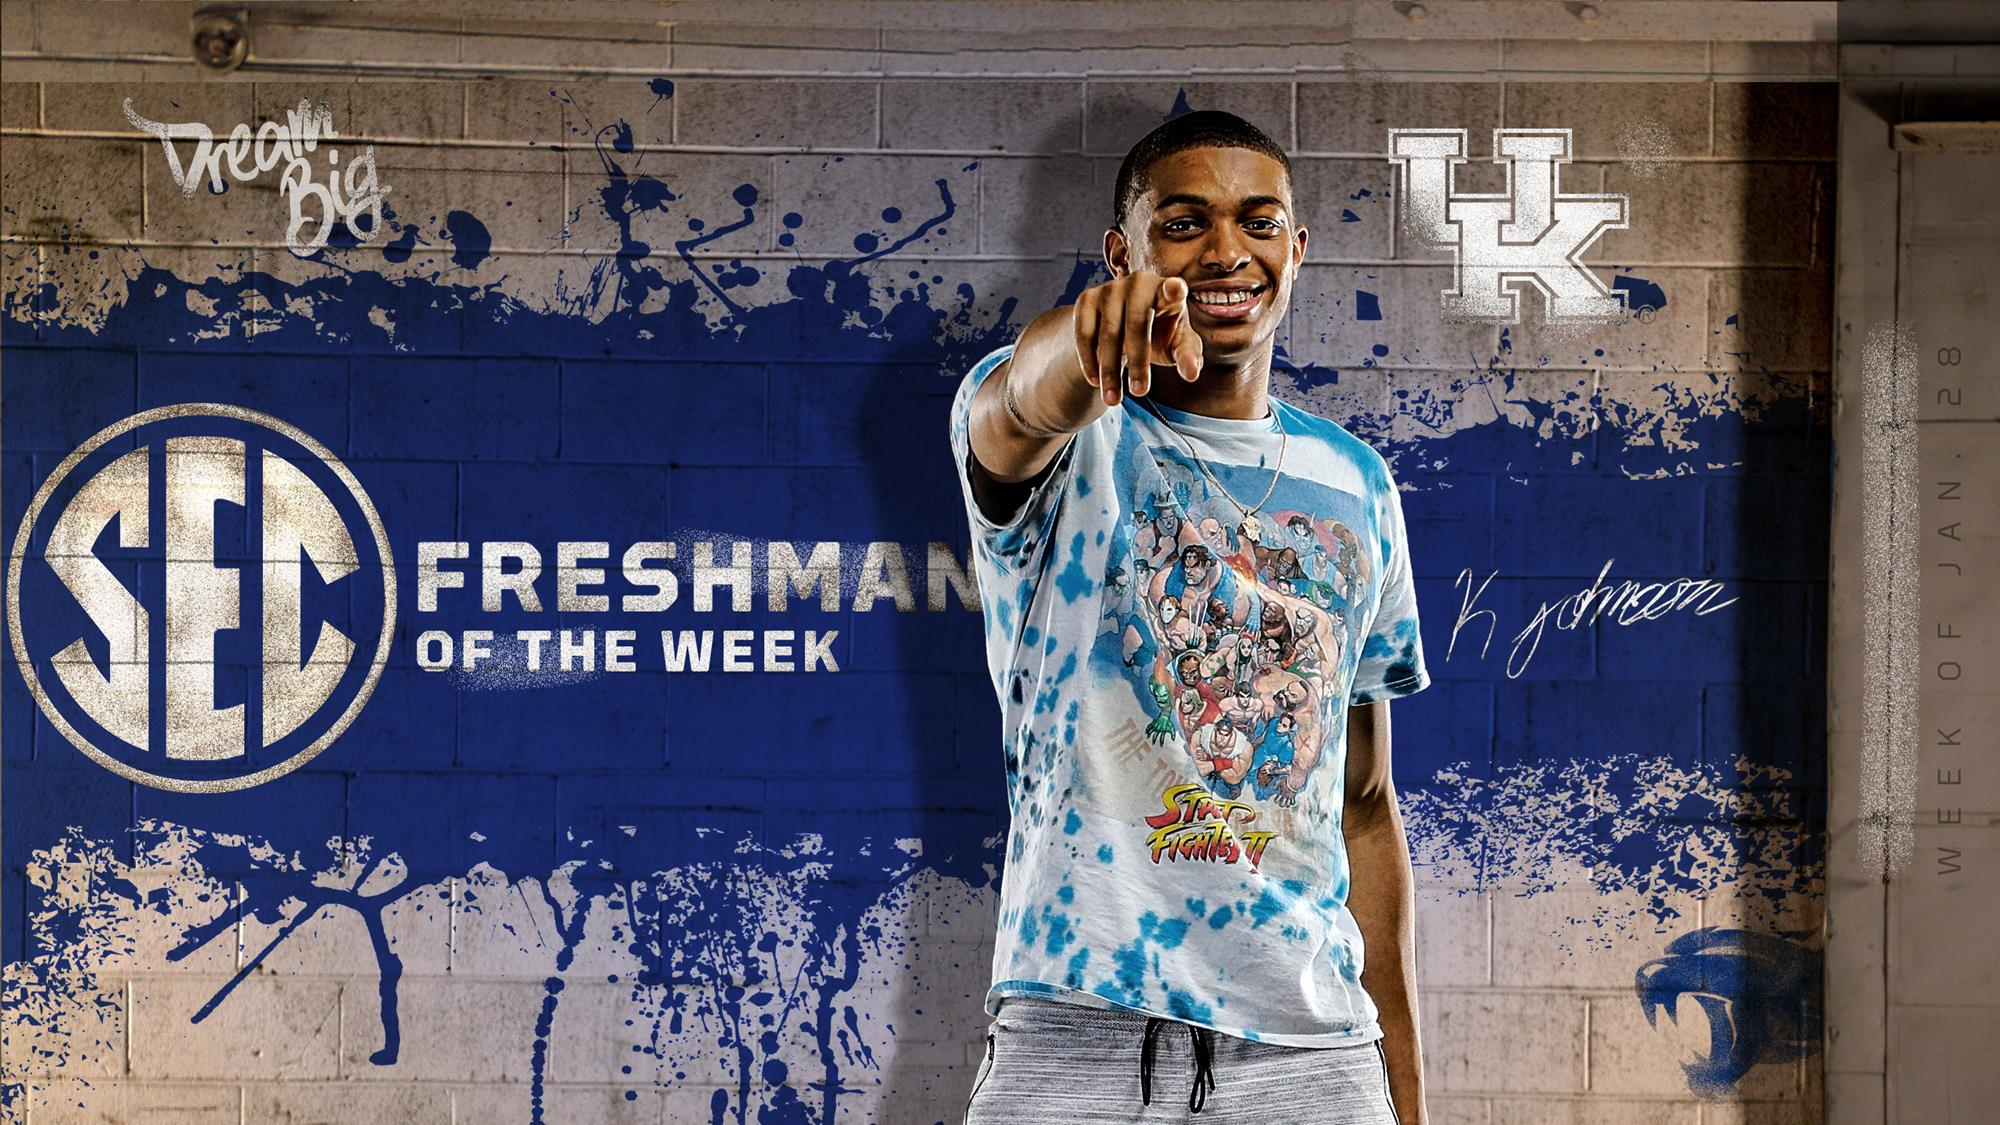 Johnson Named SEC Freshman of the Week for Third Time